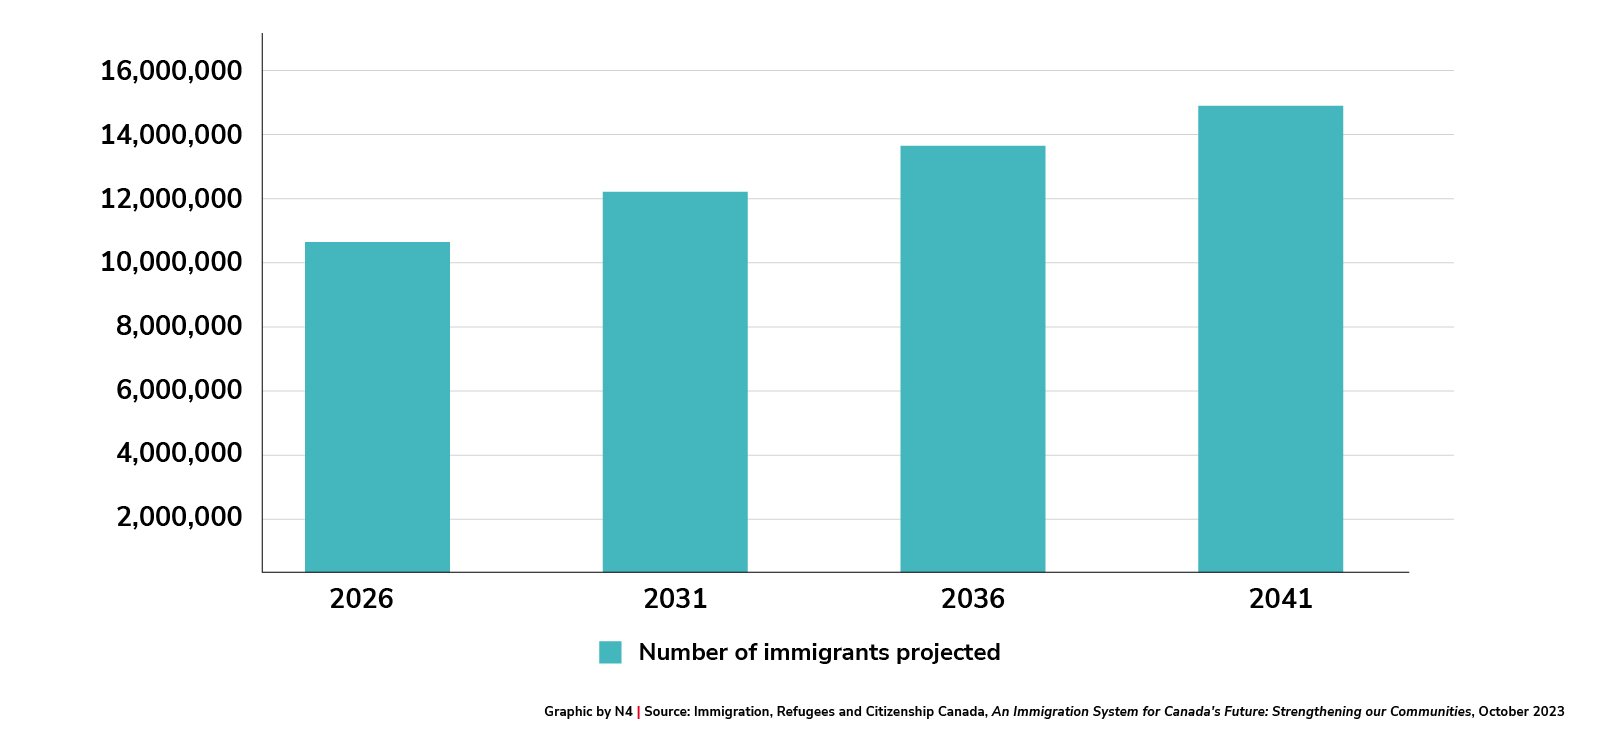 Projected number and percentage of immigrants in Canada [2026 to 2041]